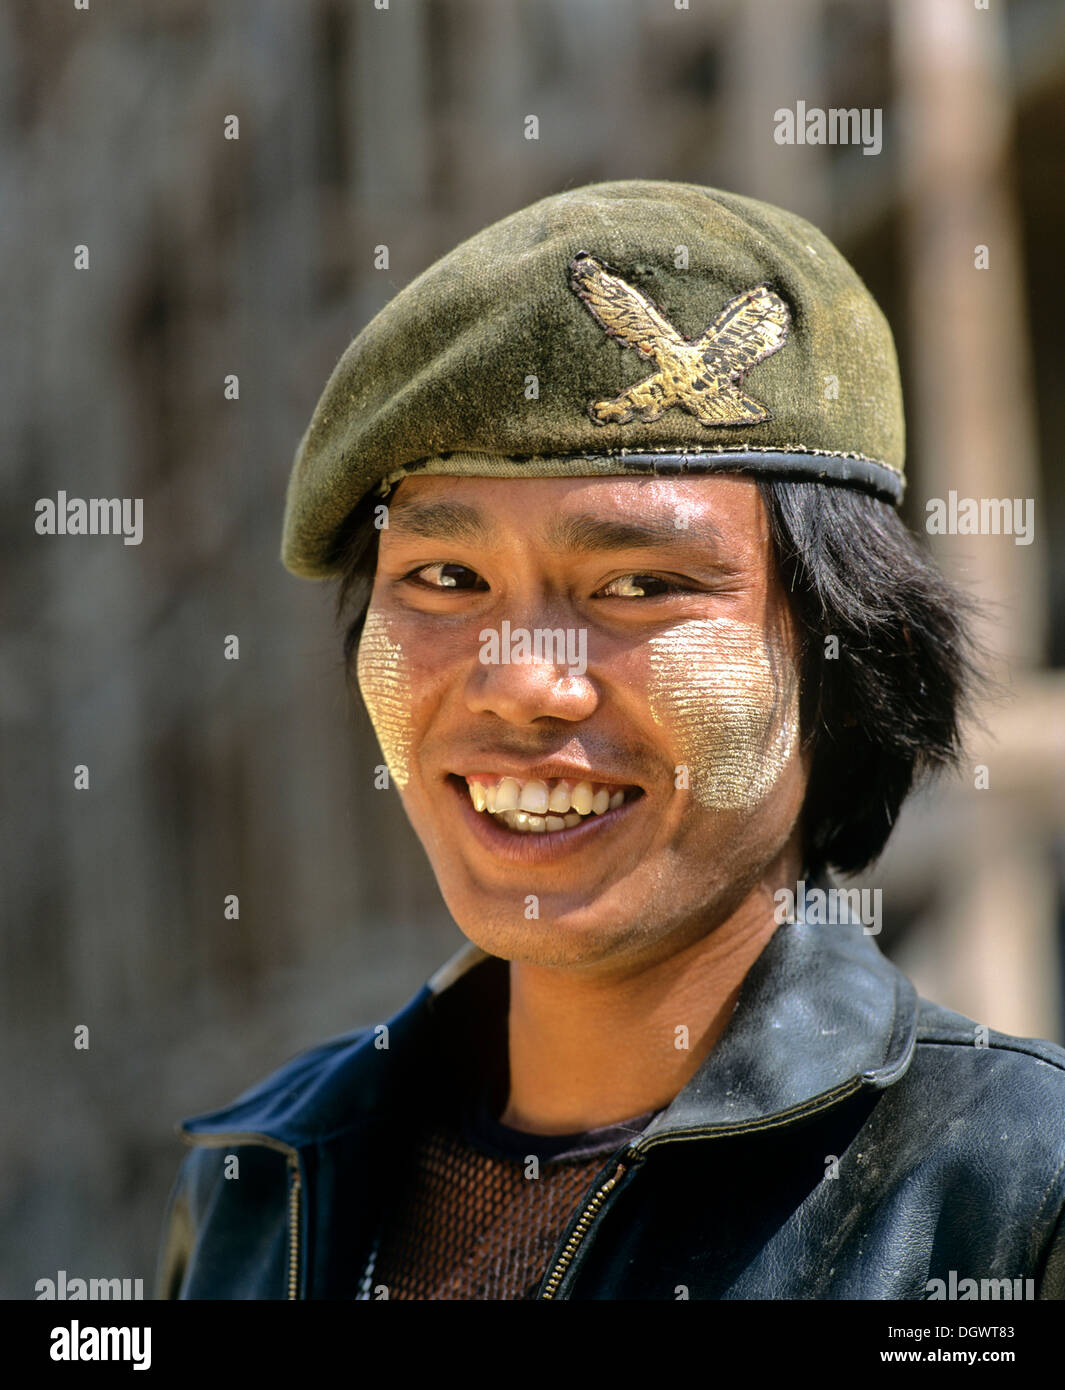 Patriotic young man with thanaka paste on his face, wearing an army cap and a leather jacket, Tachilek, Shan State, Myanmar Stock Photo